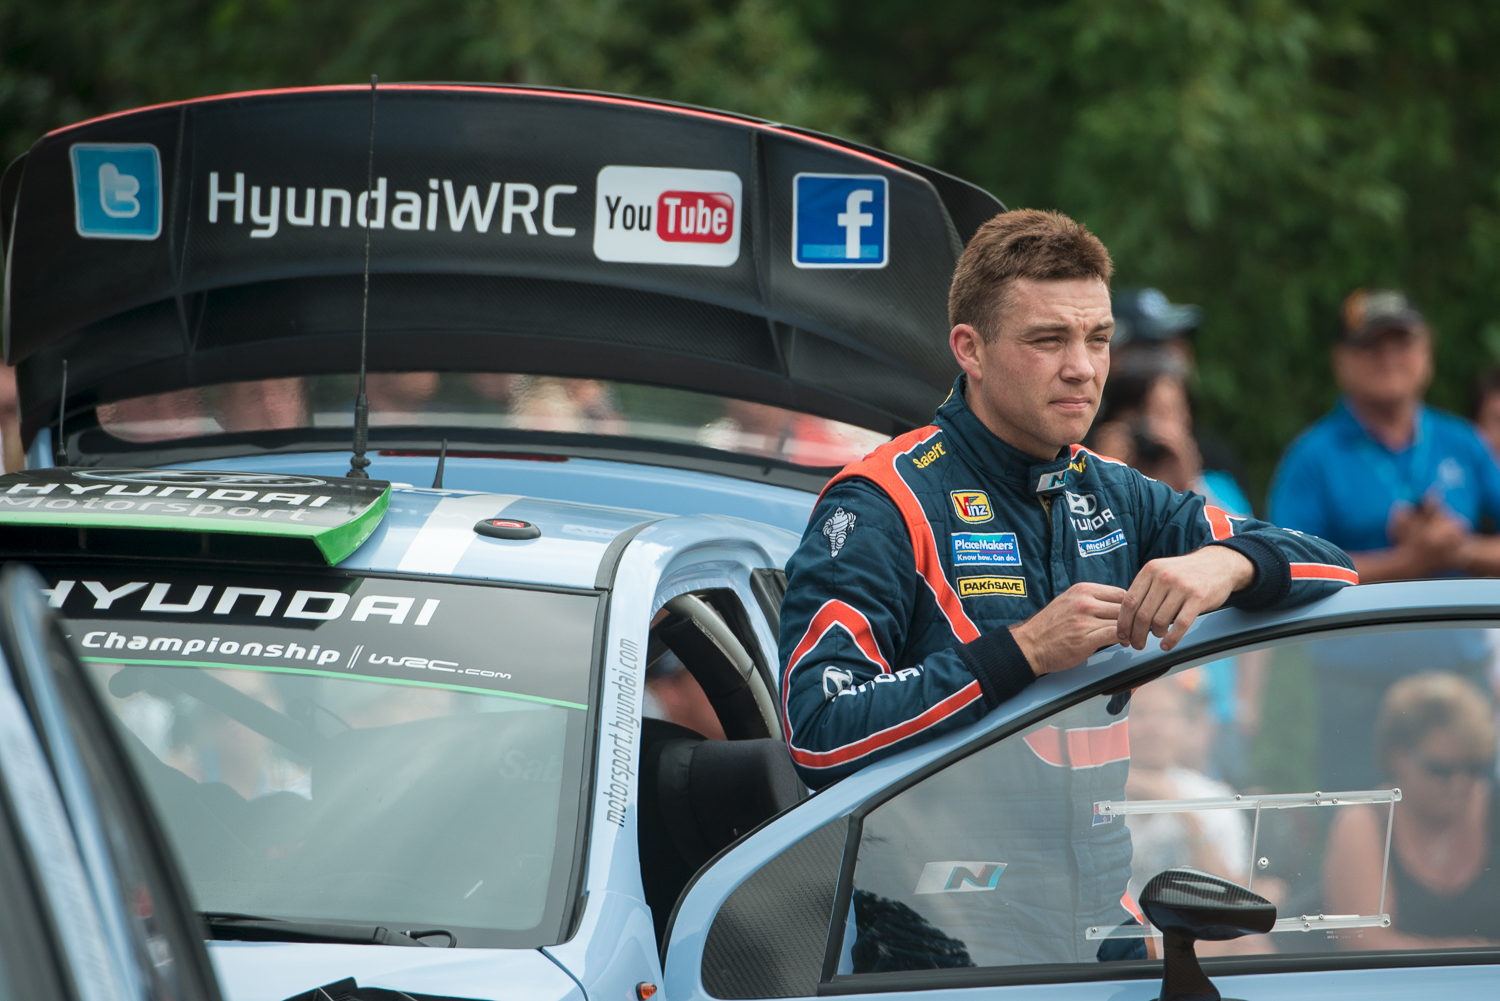 Paddon slips to 8th place finish with power steering issue